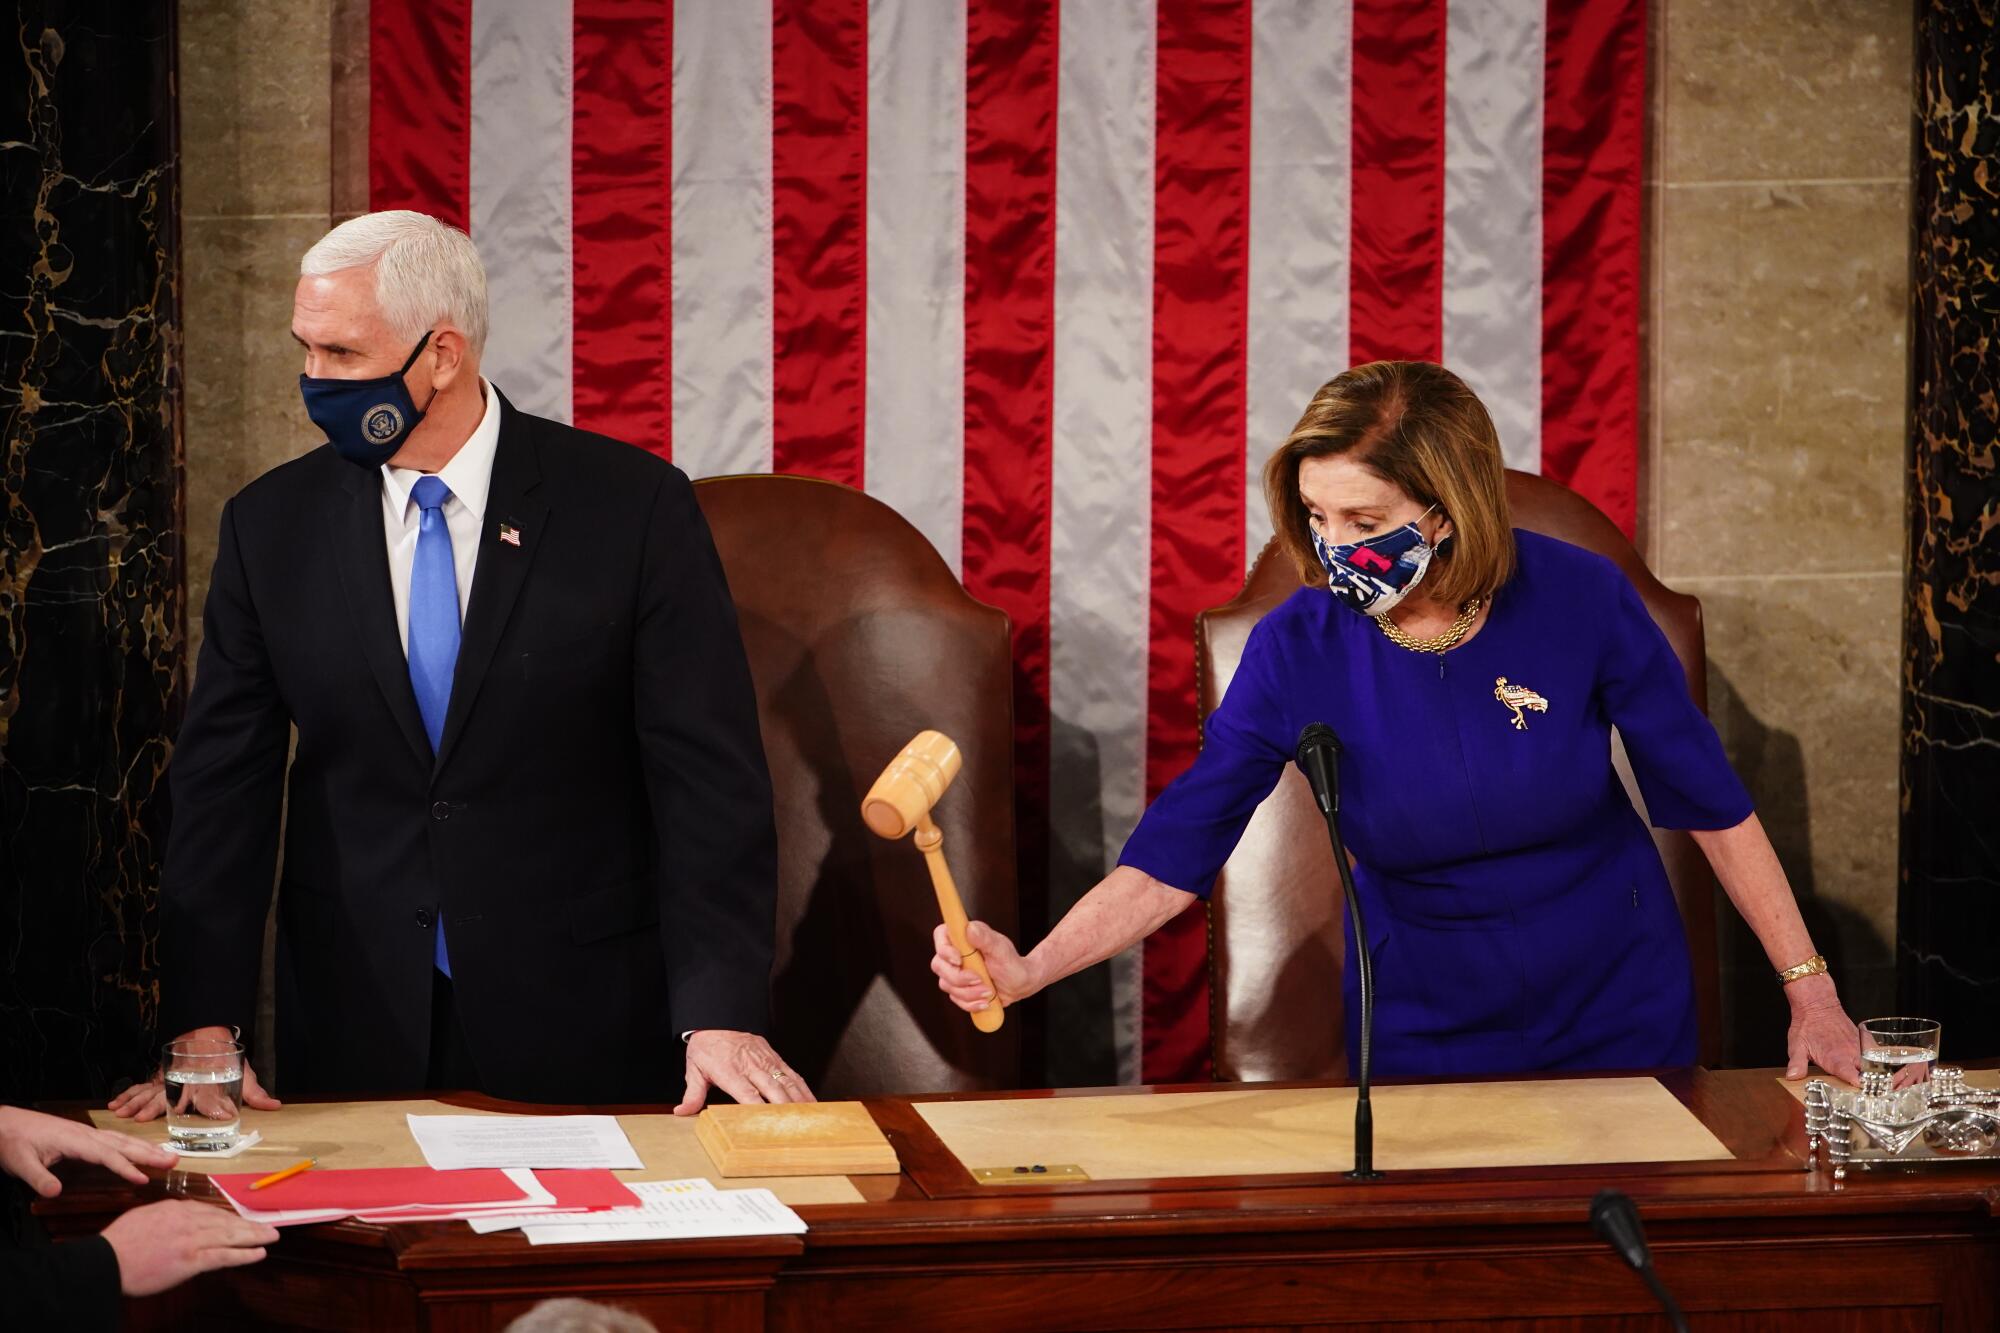 Mike Pence stand next to Nancy Pelosi, who holds the gavel